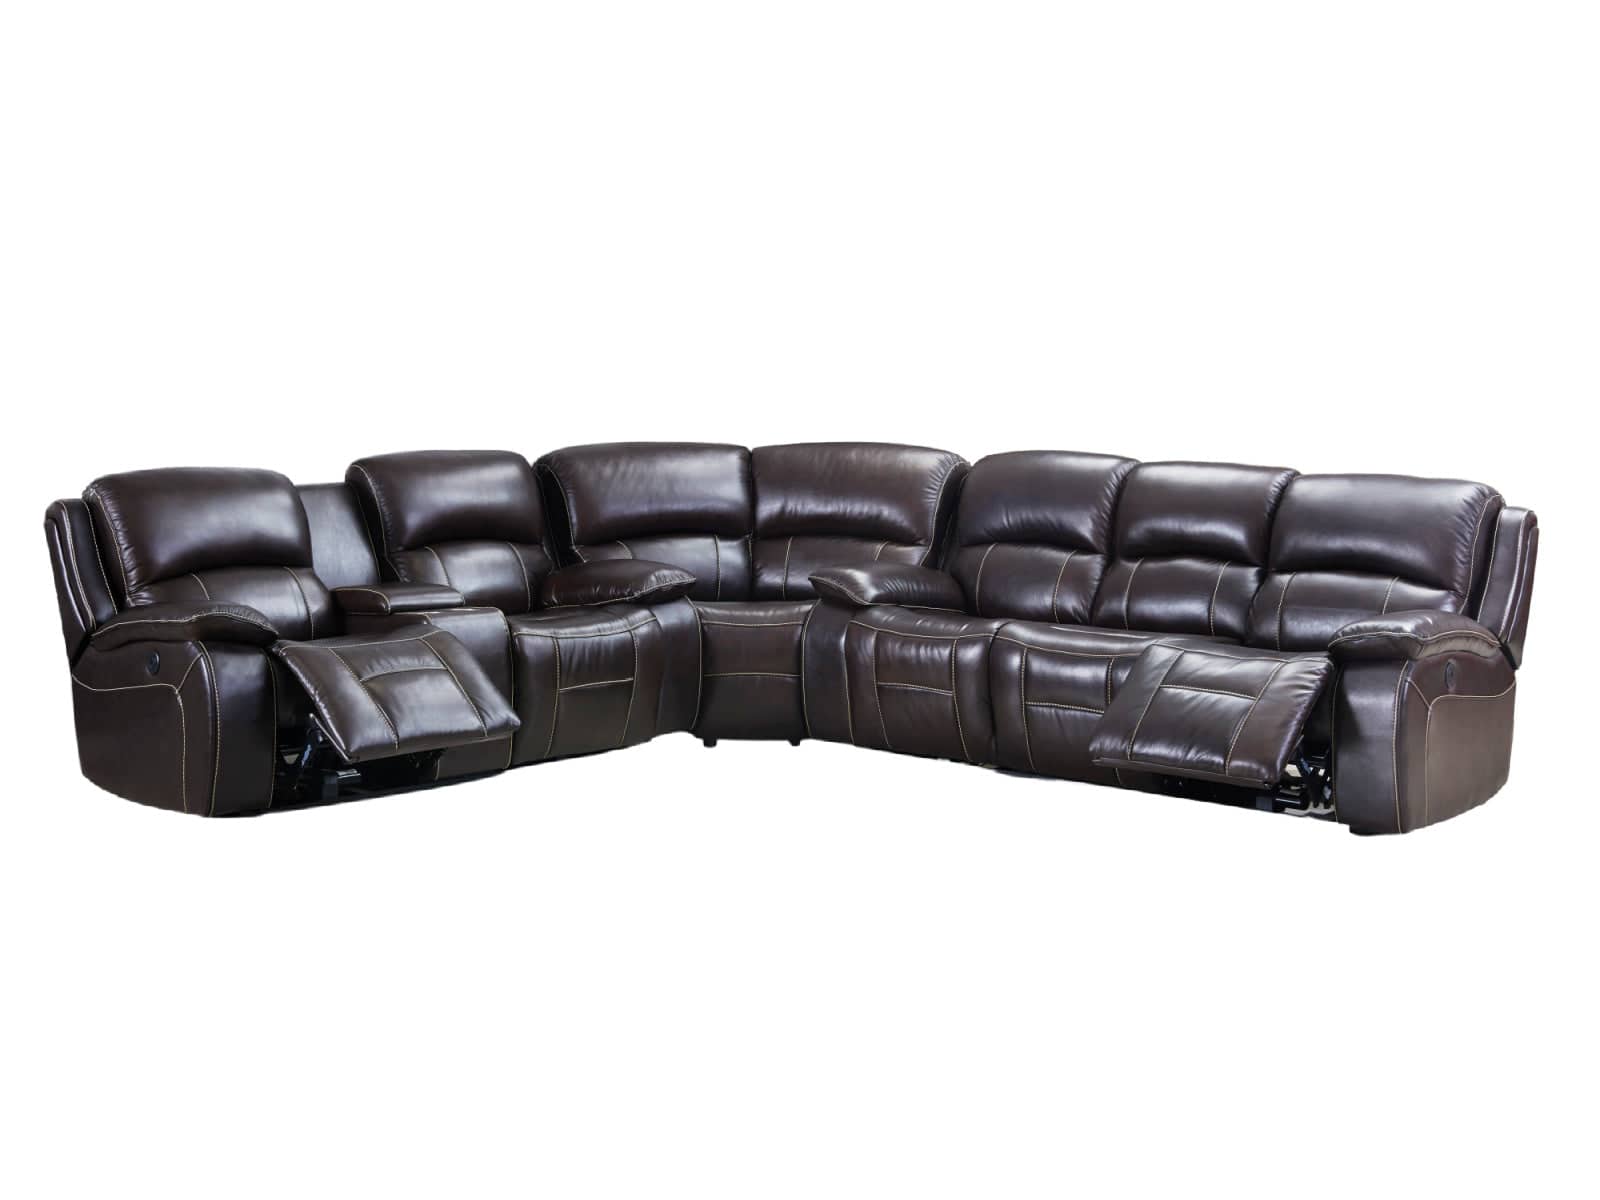 3 PIECE POWER MOTION SECTIONAL - BEL Furniture